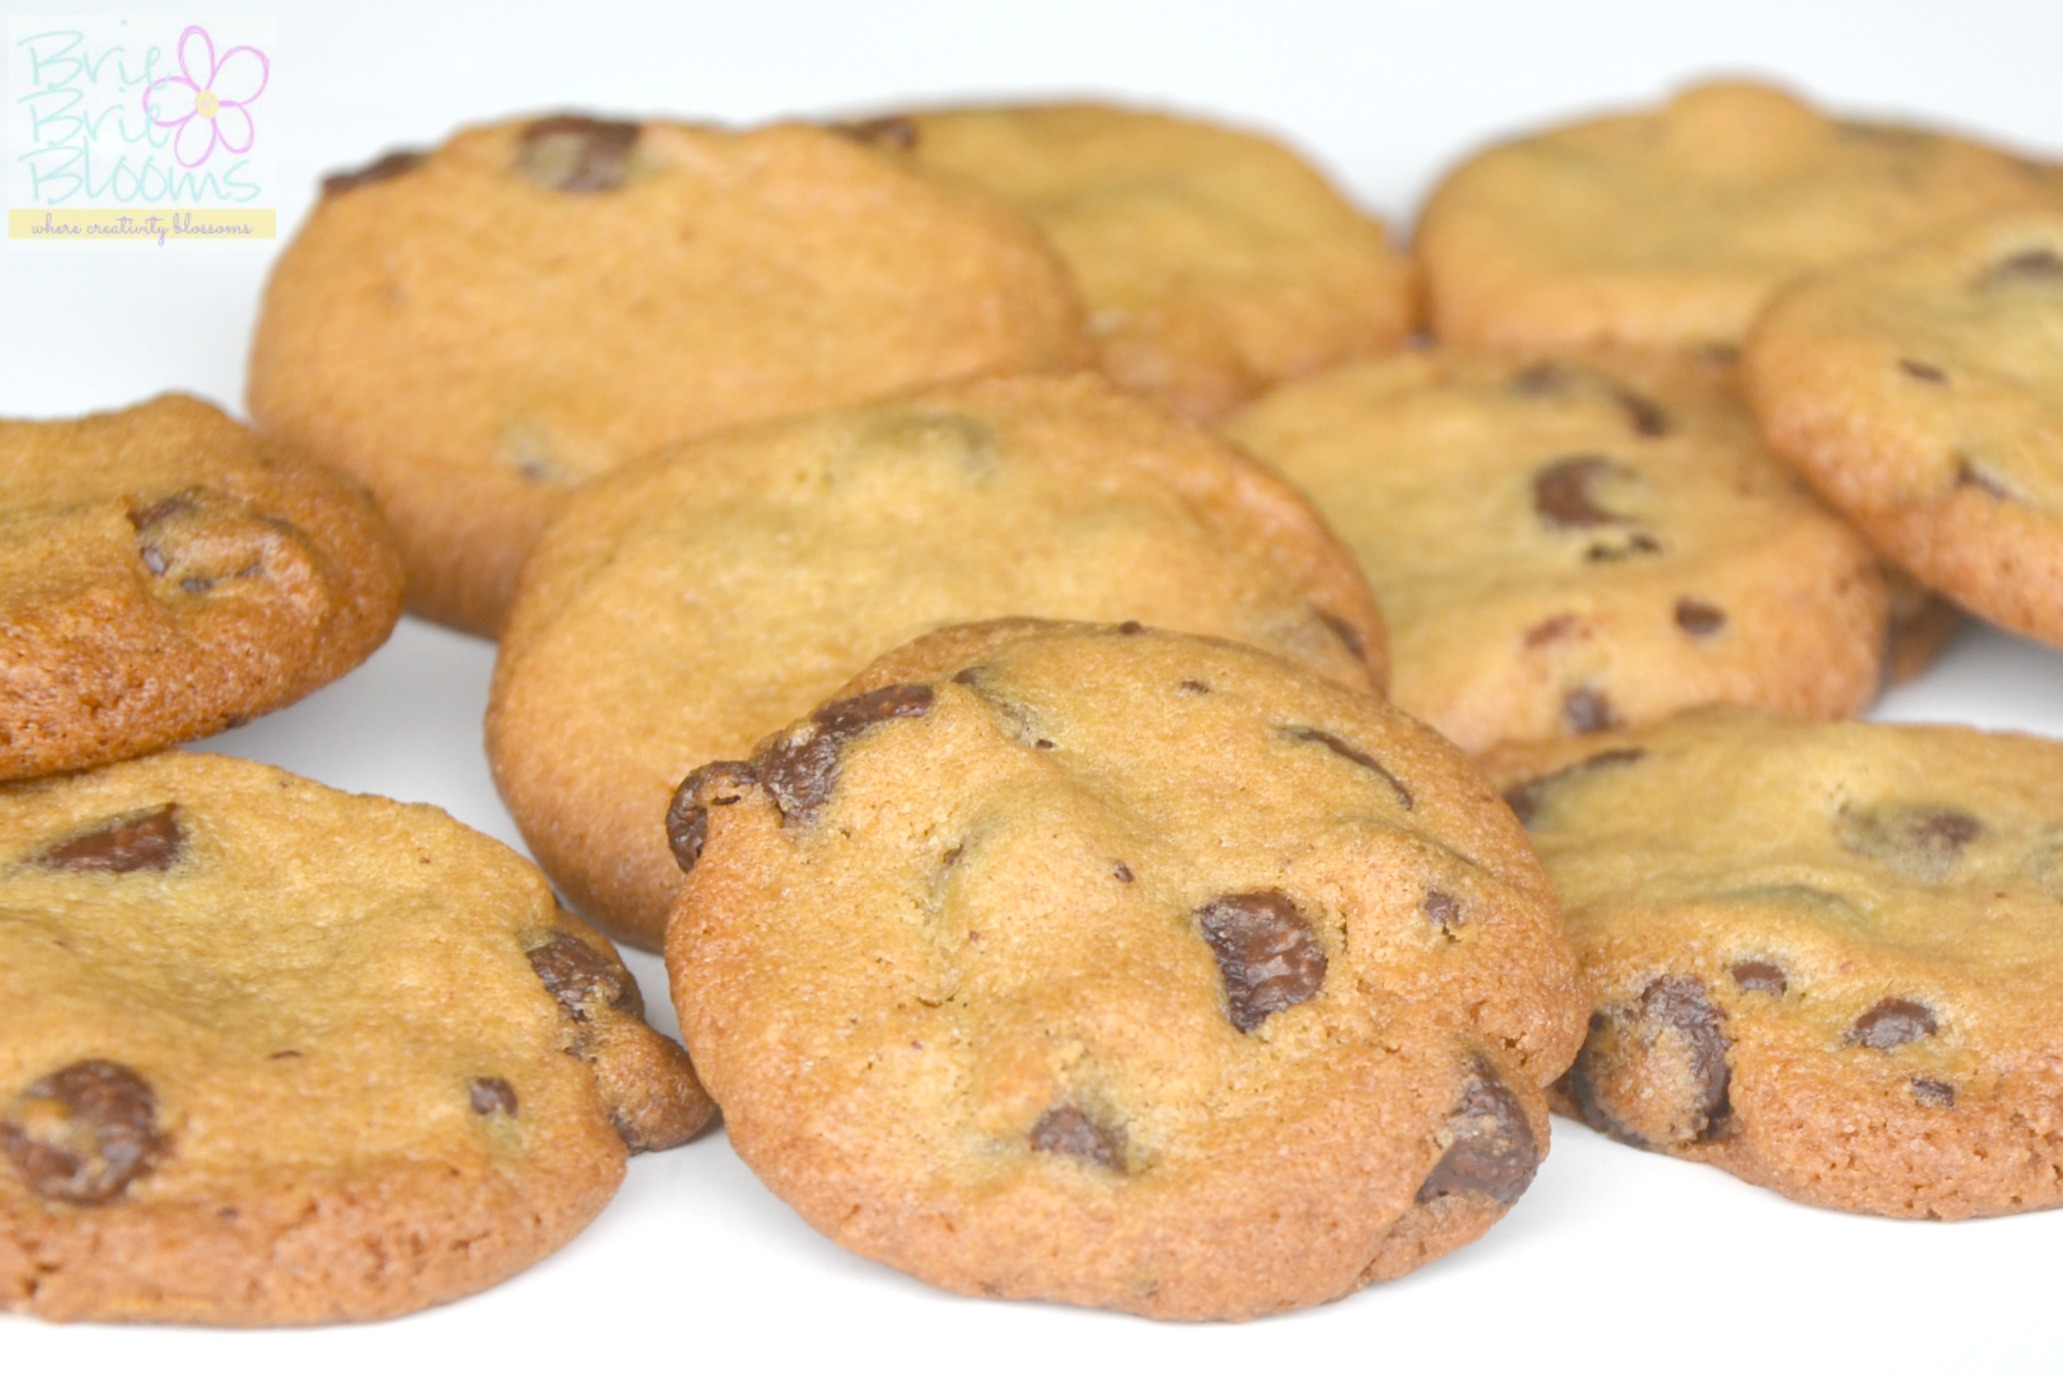 baked nestle toll house cookies